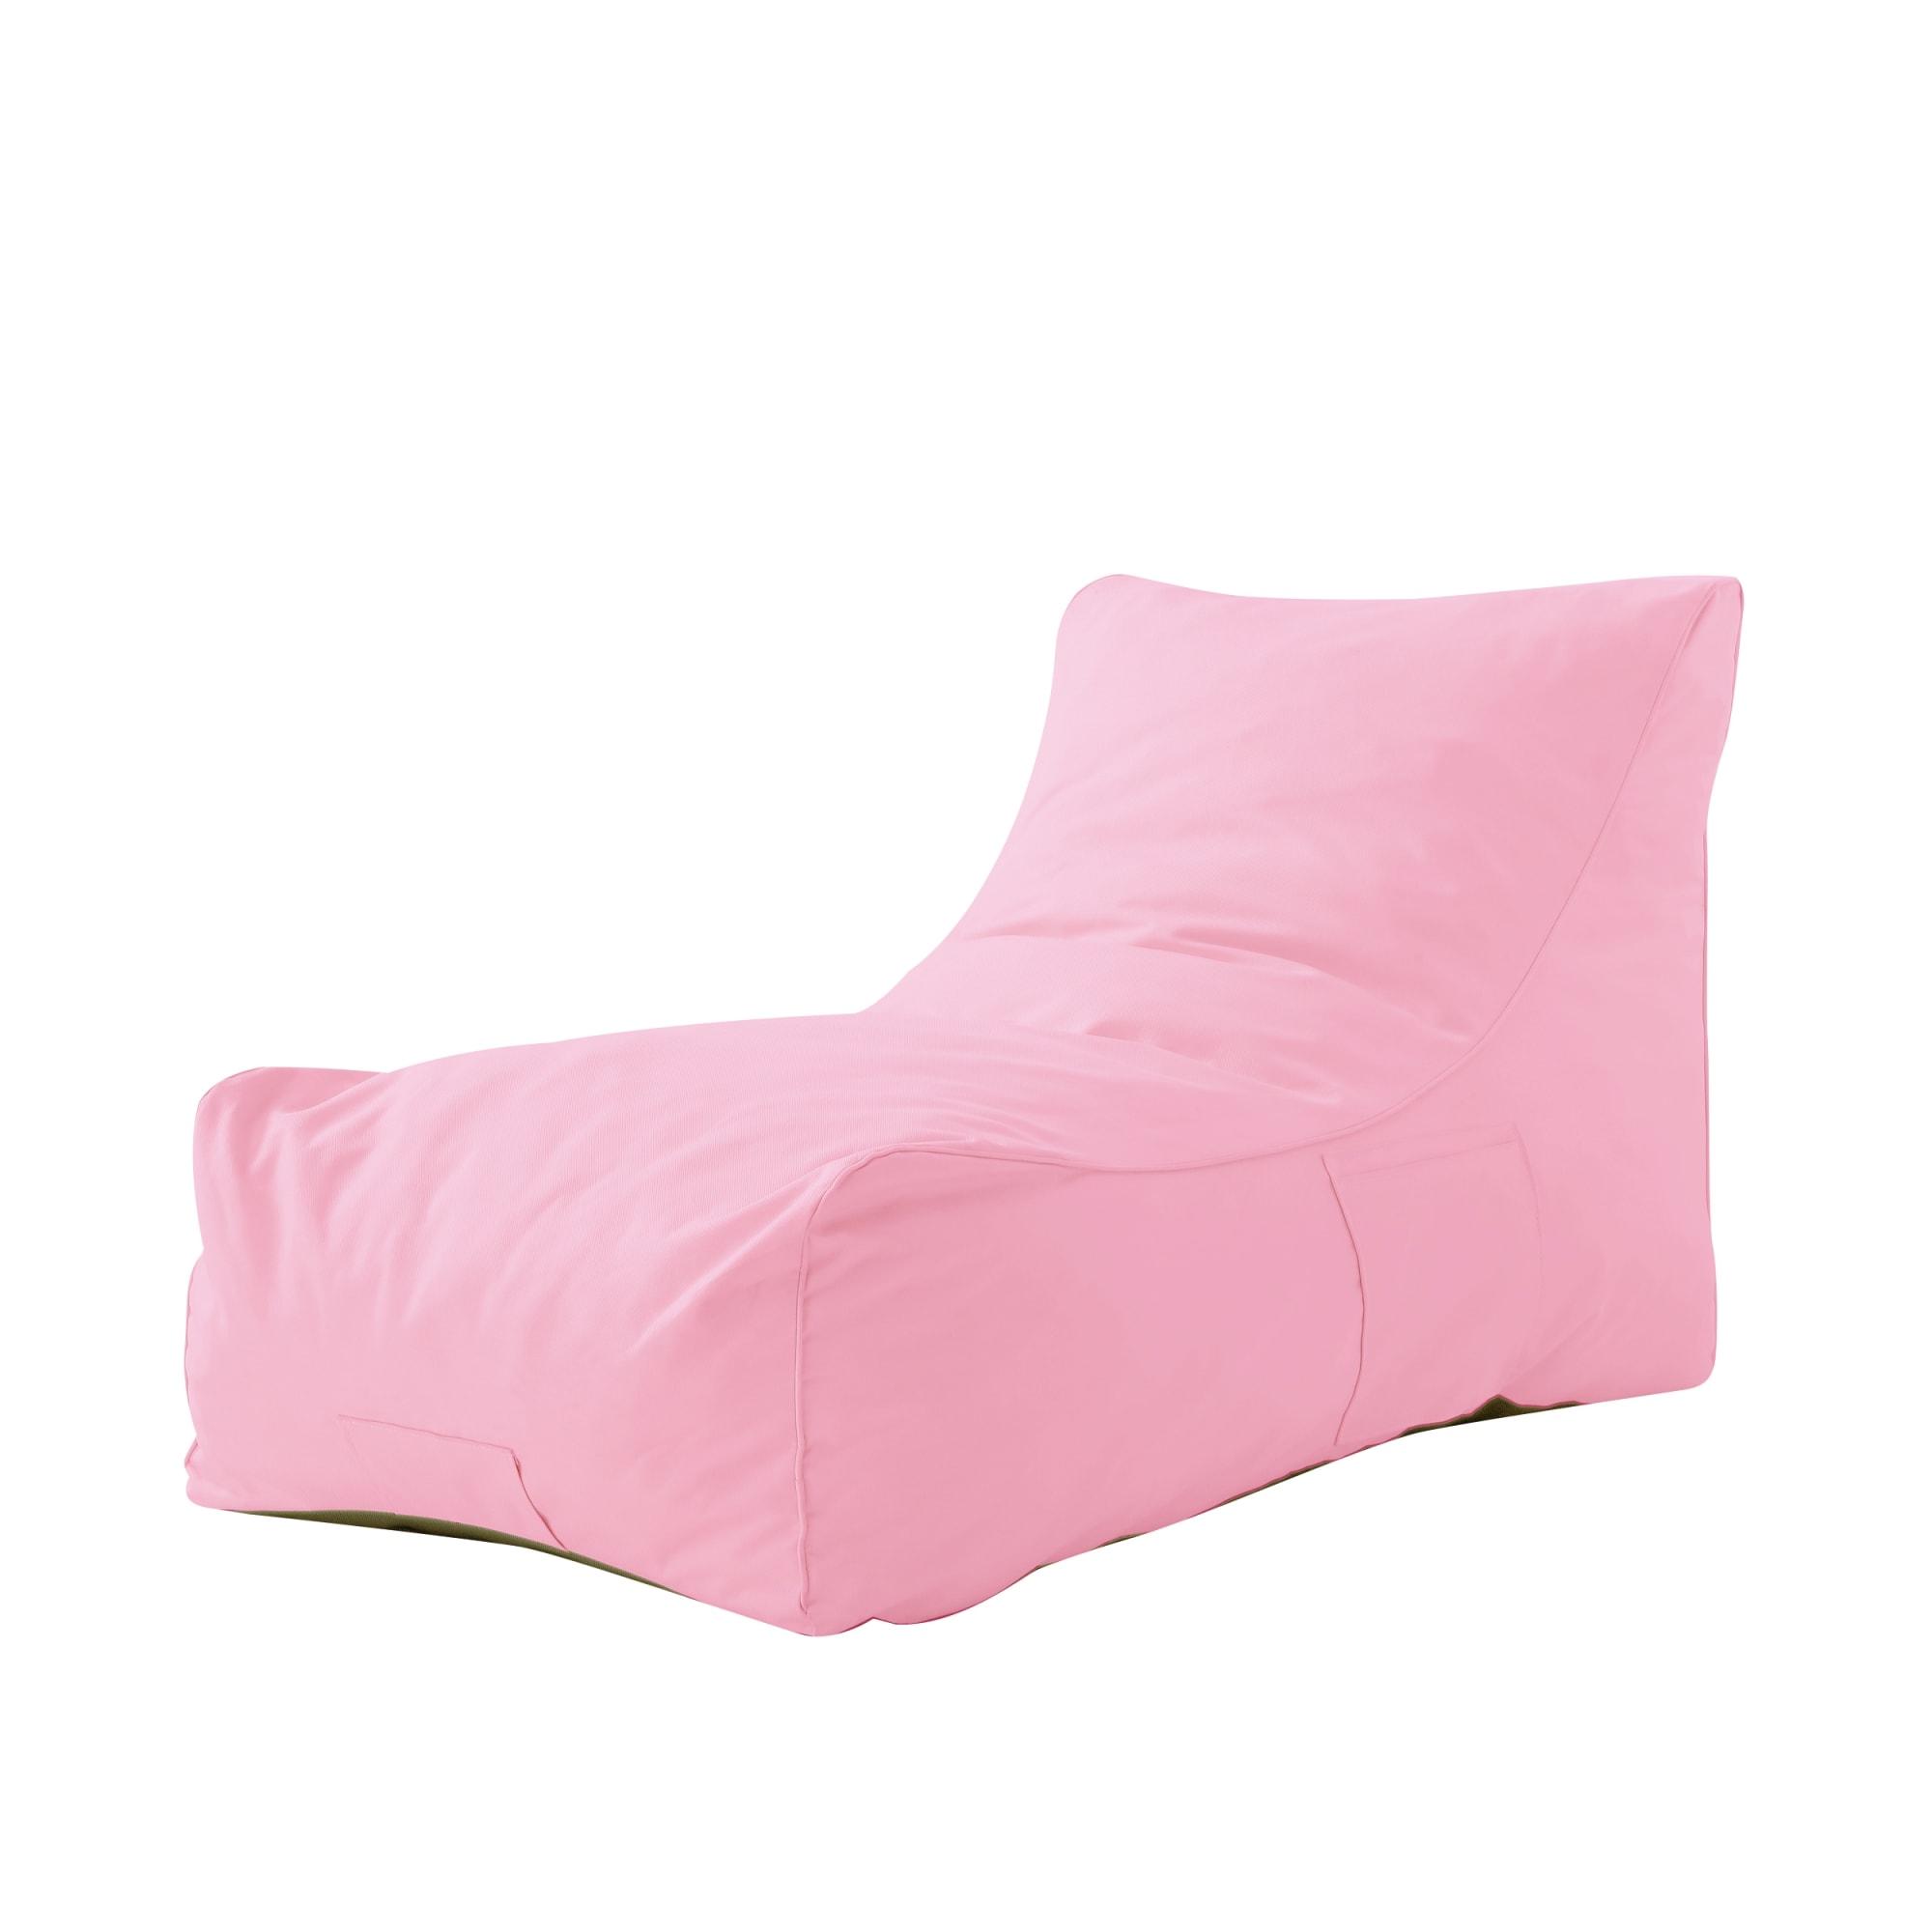 Loungie Resty Pink Bean Bag Chair with Removable Cover - Contemporary ...